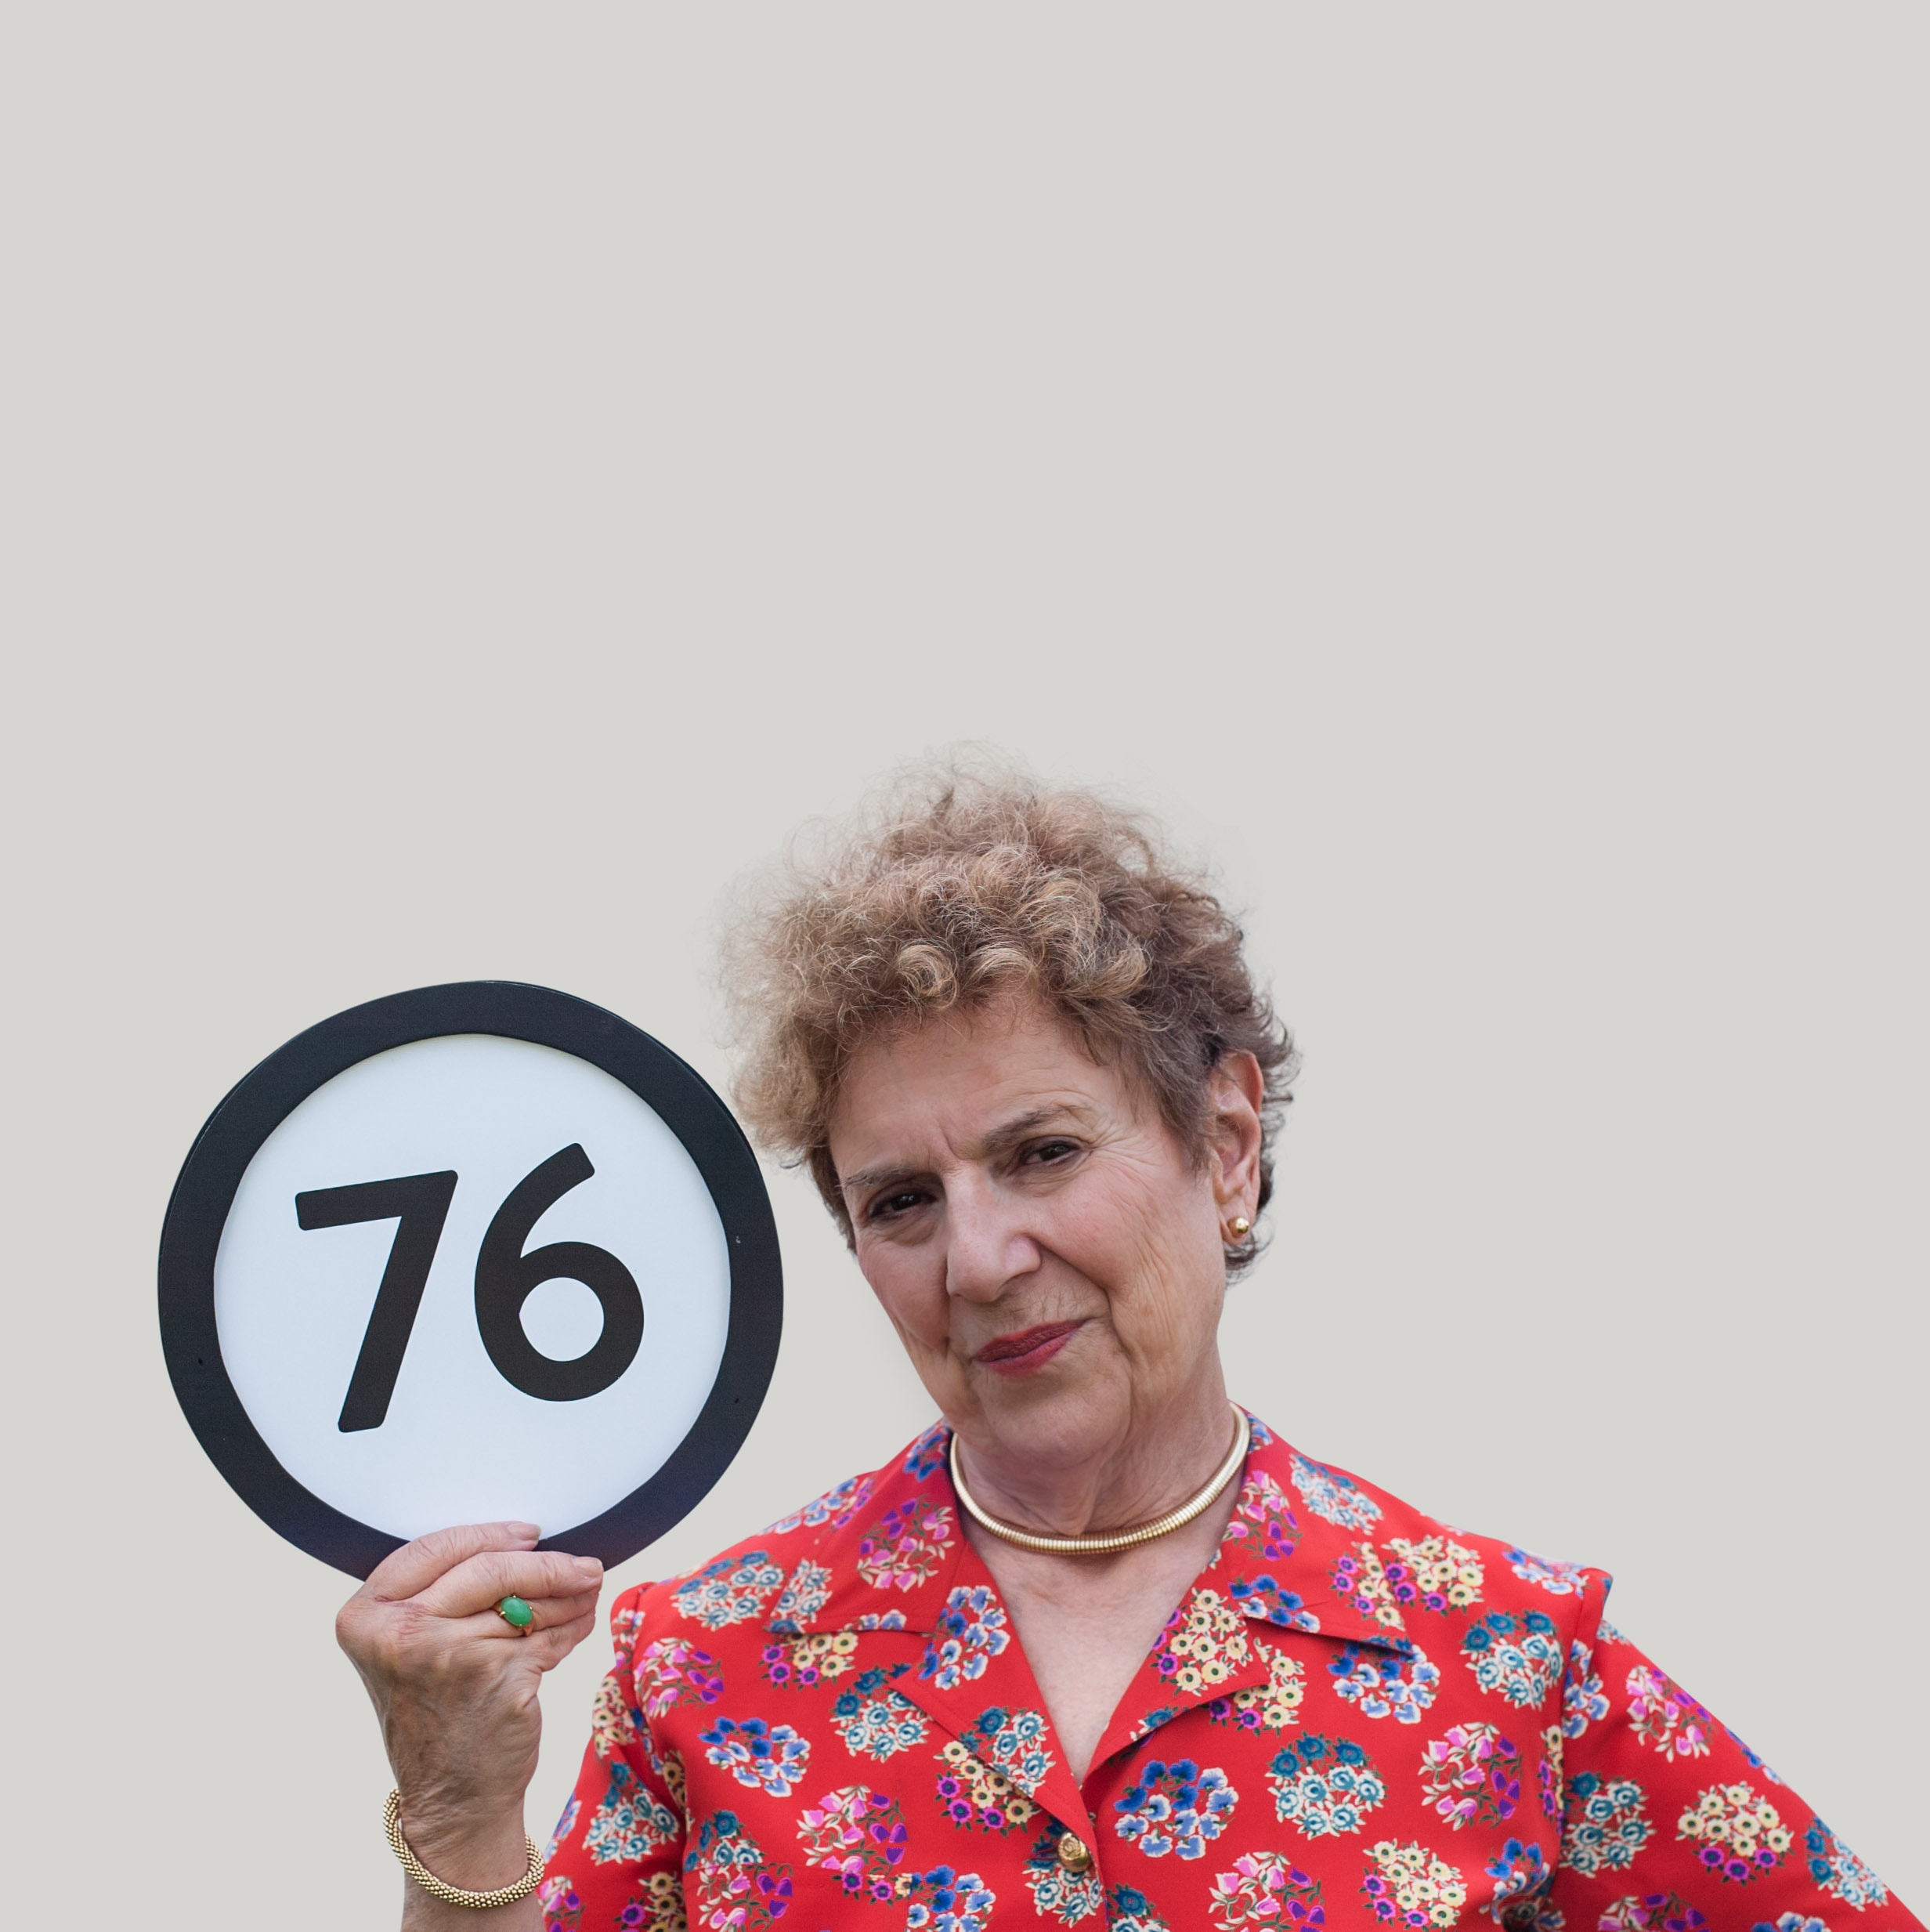 76 year old woman wears a red floral shirt, sleek gold jewelry, and a serious gaze into the lens. With one hand she grips a token with the number 76 on it. This digital image is part of the 1 to Infinity portrait photography series by Danny Goldfield.